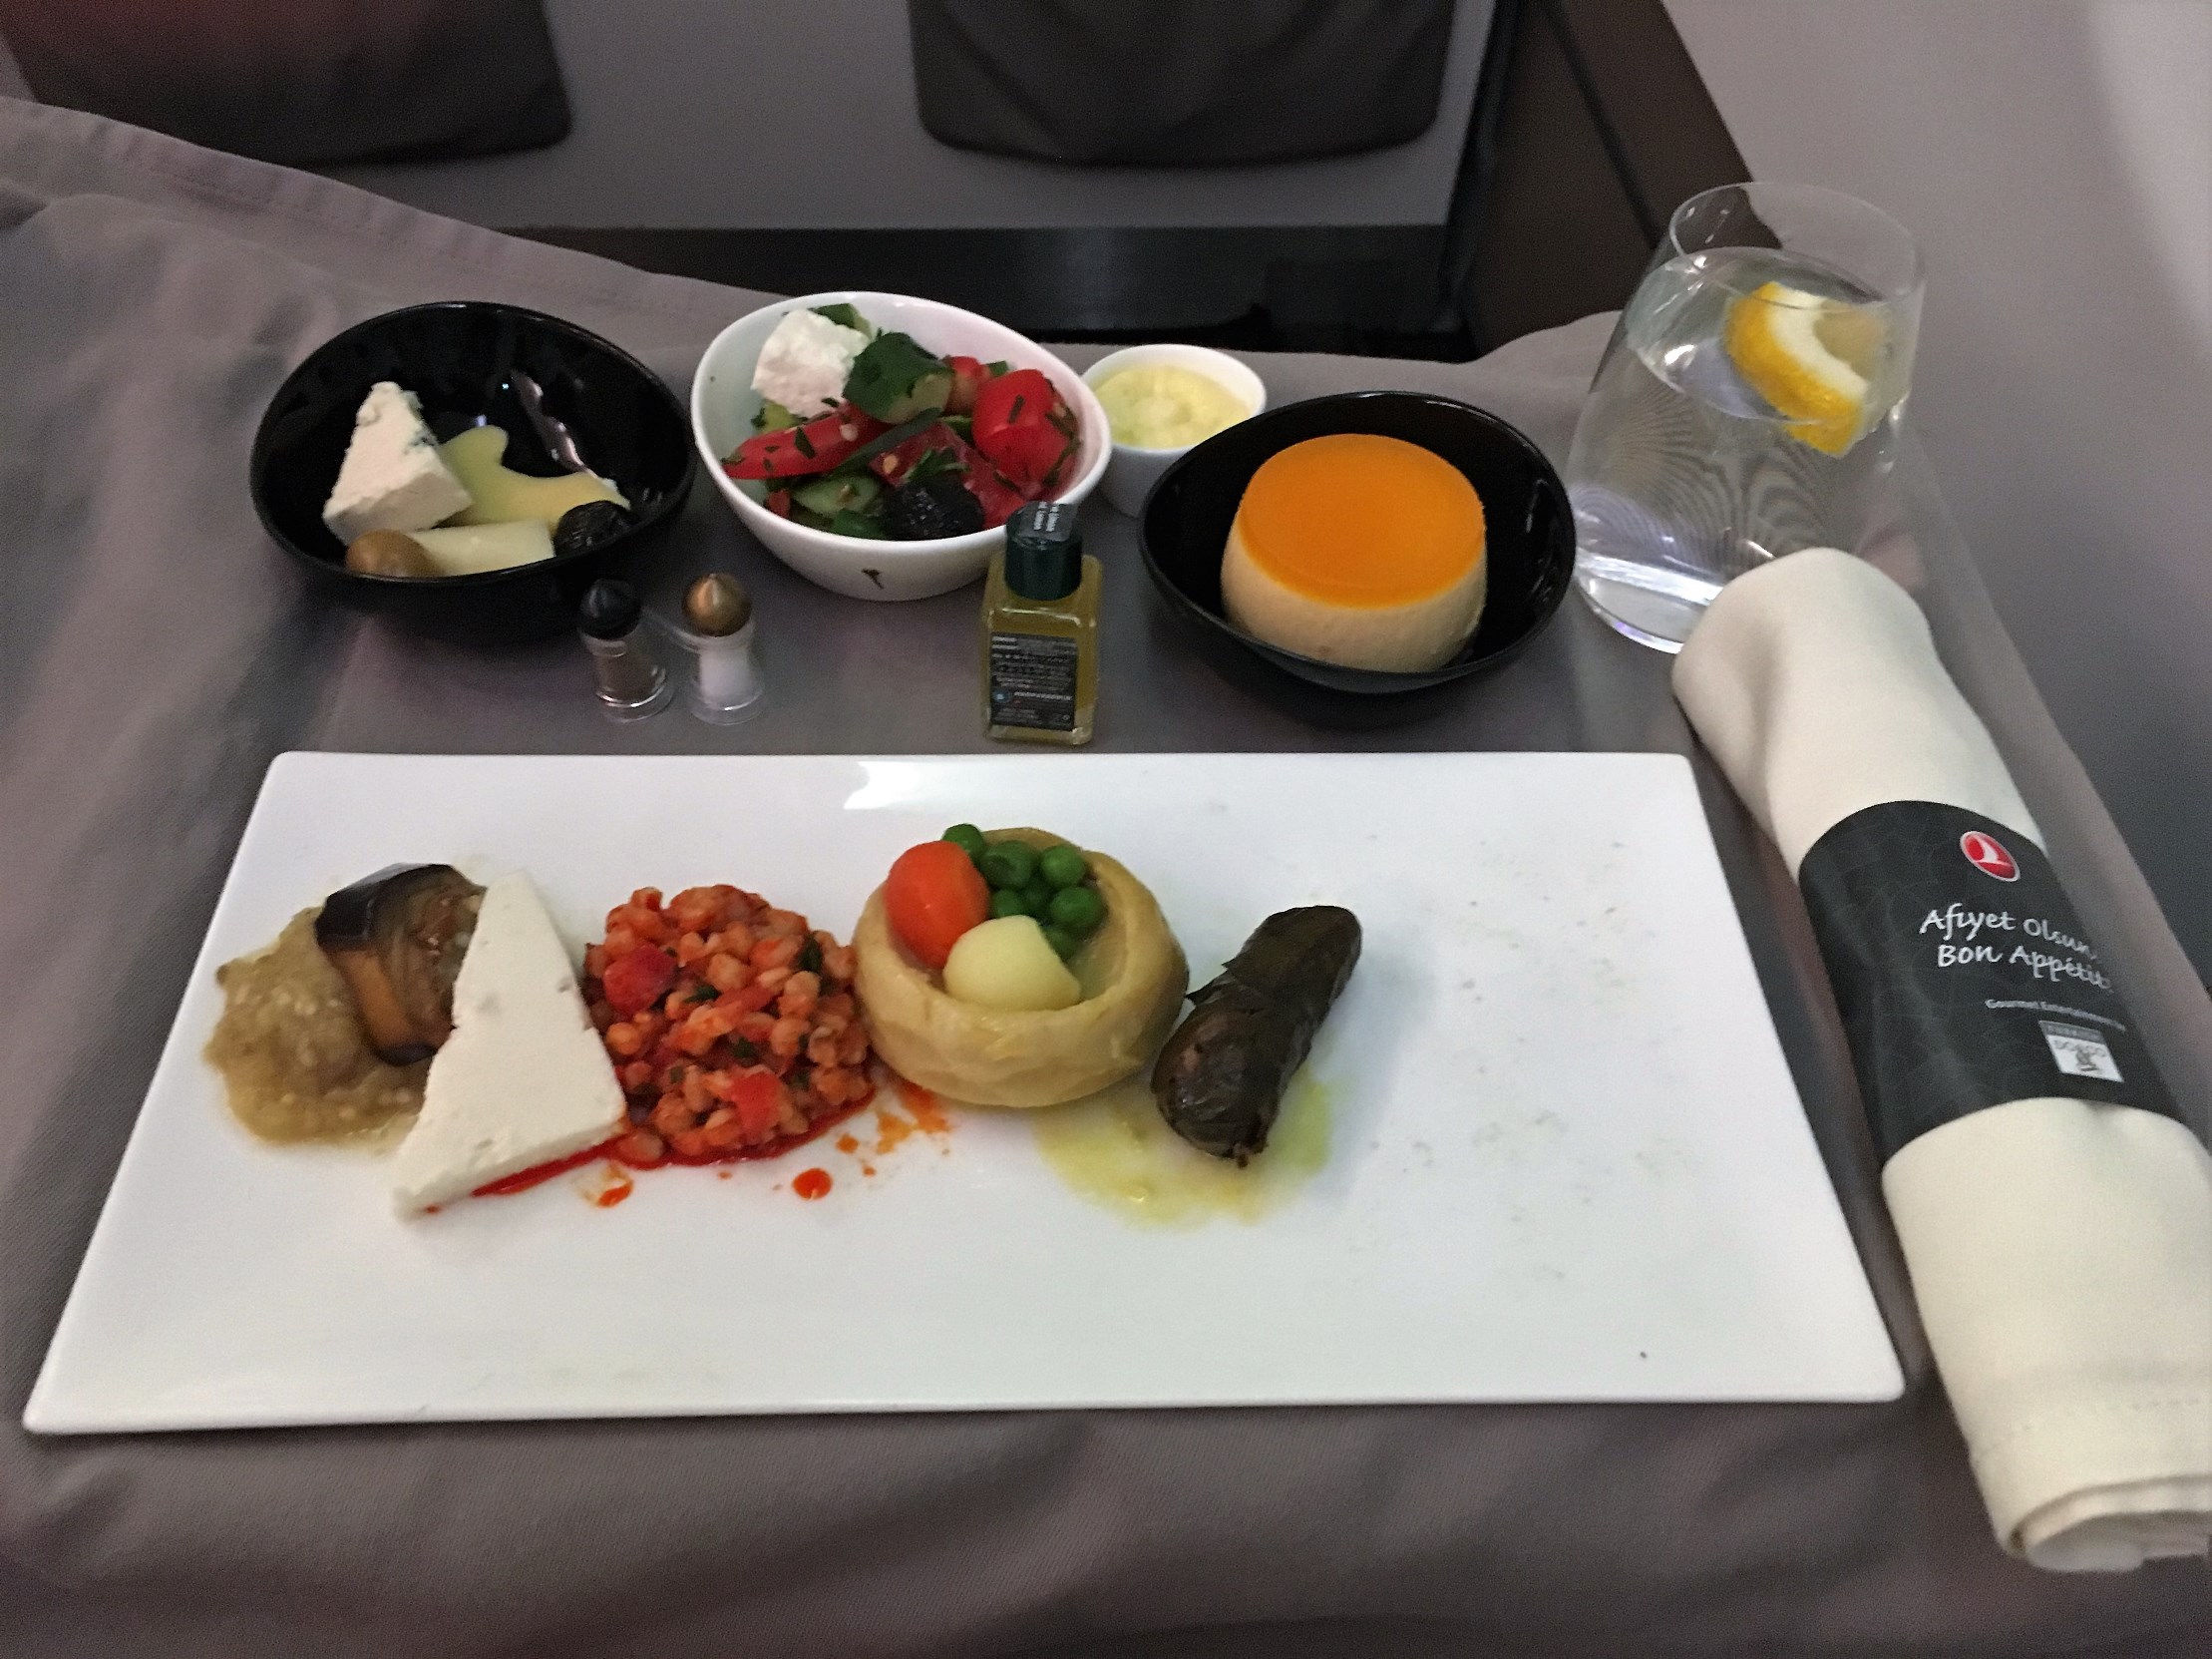 Turkish Airlines Inflight Meal (Istanbul-Amsterdam)